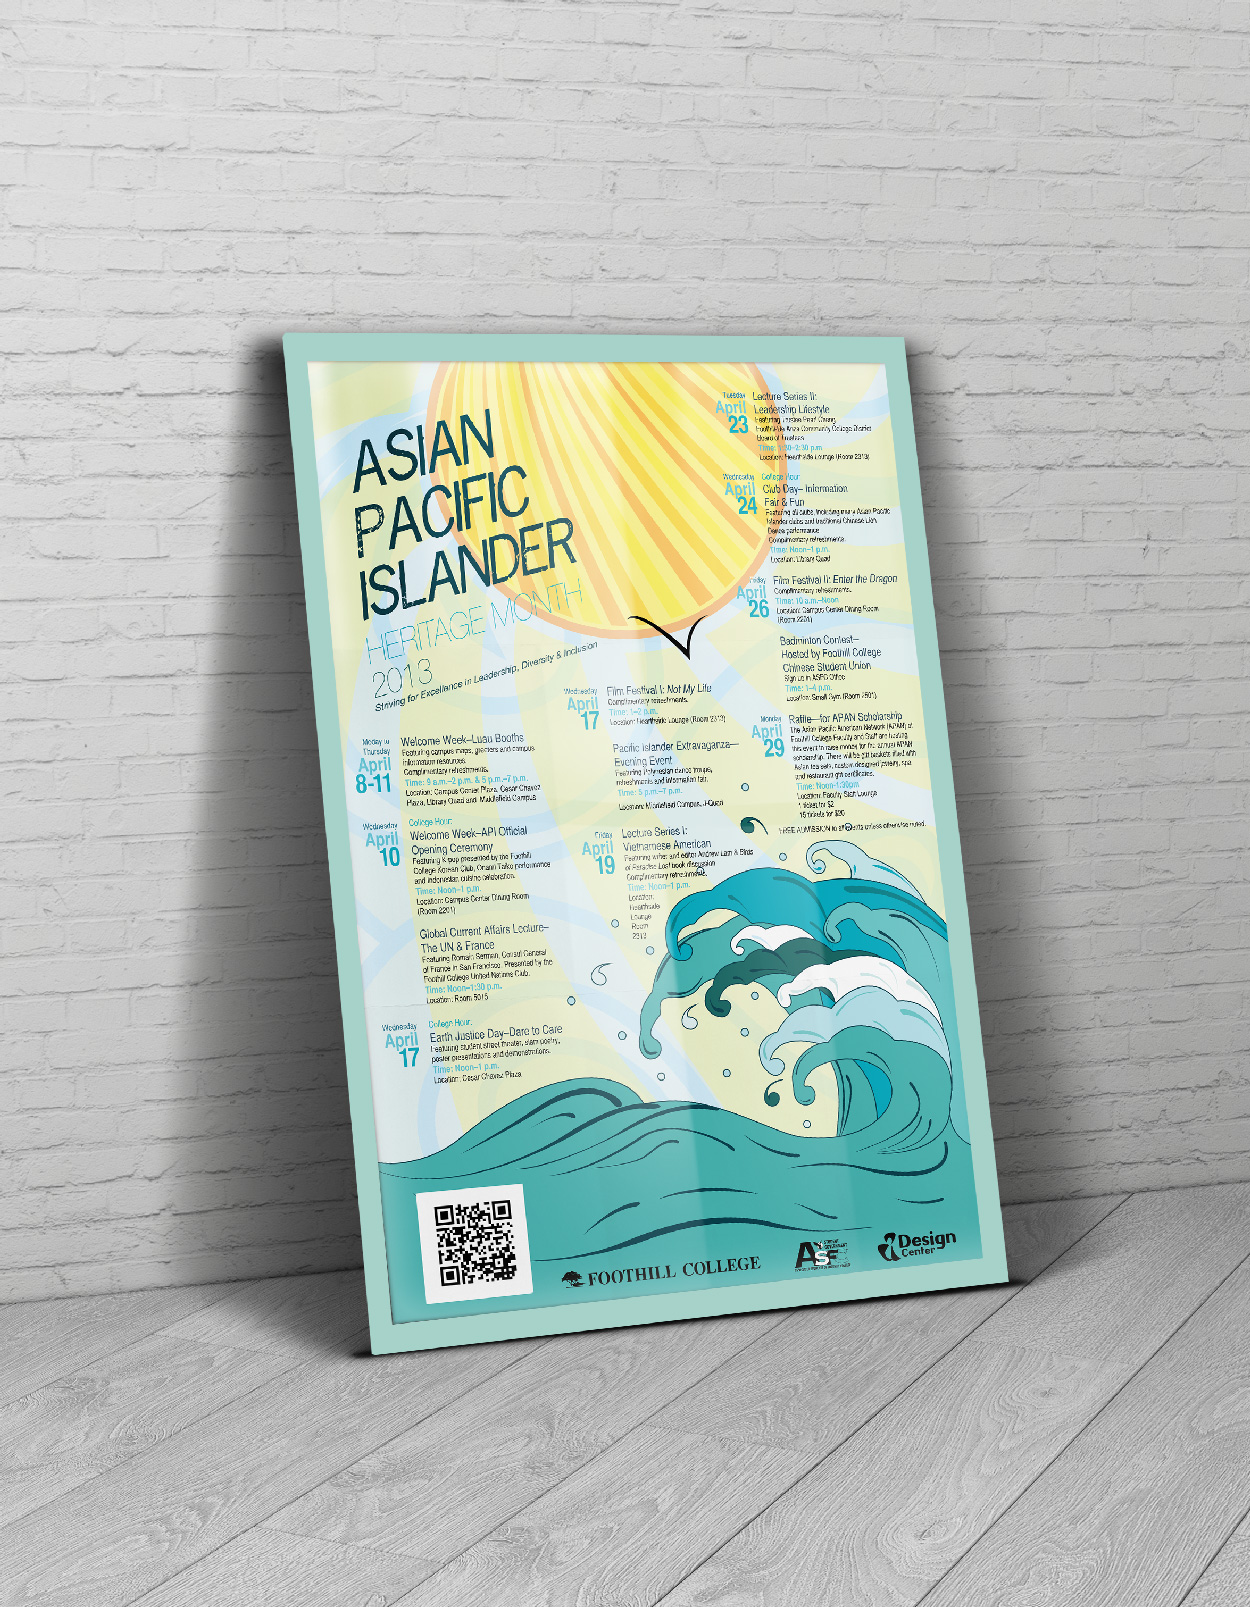 Asian Pacific Islander heritage month